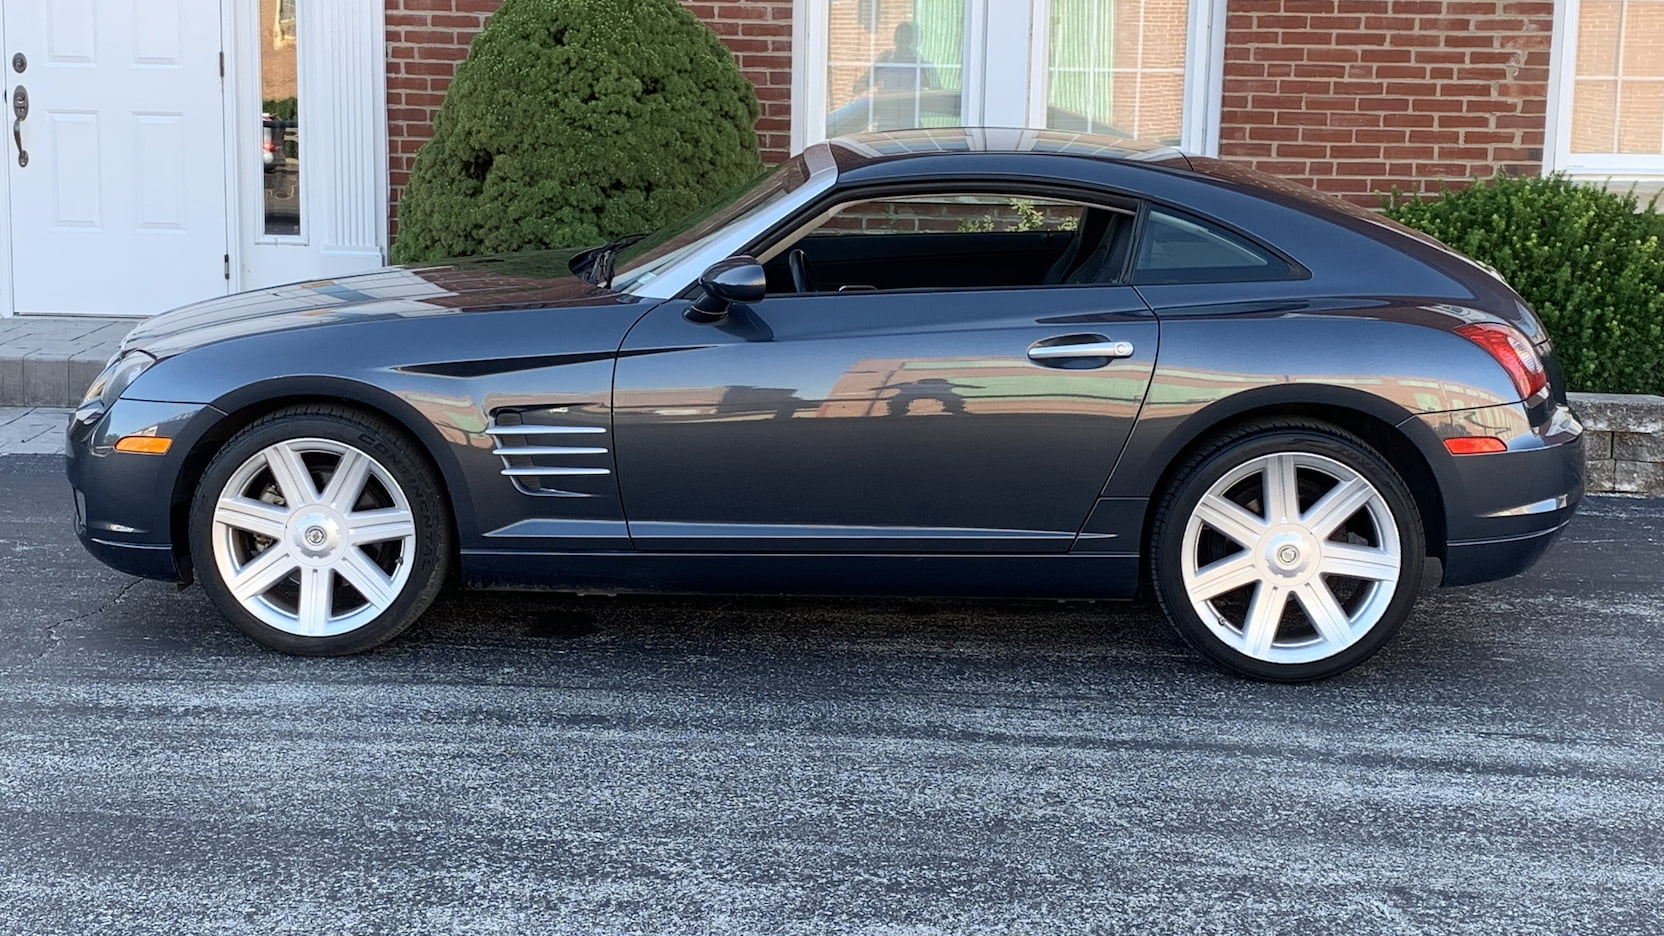 2007 Chrysler Crossfire Limited | F50 | Louisville 2019